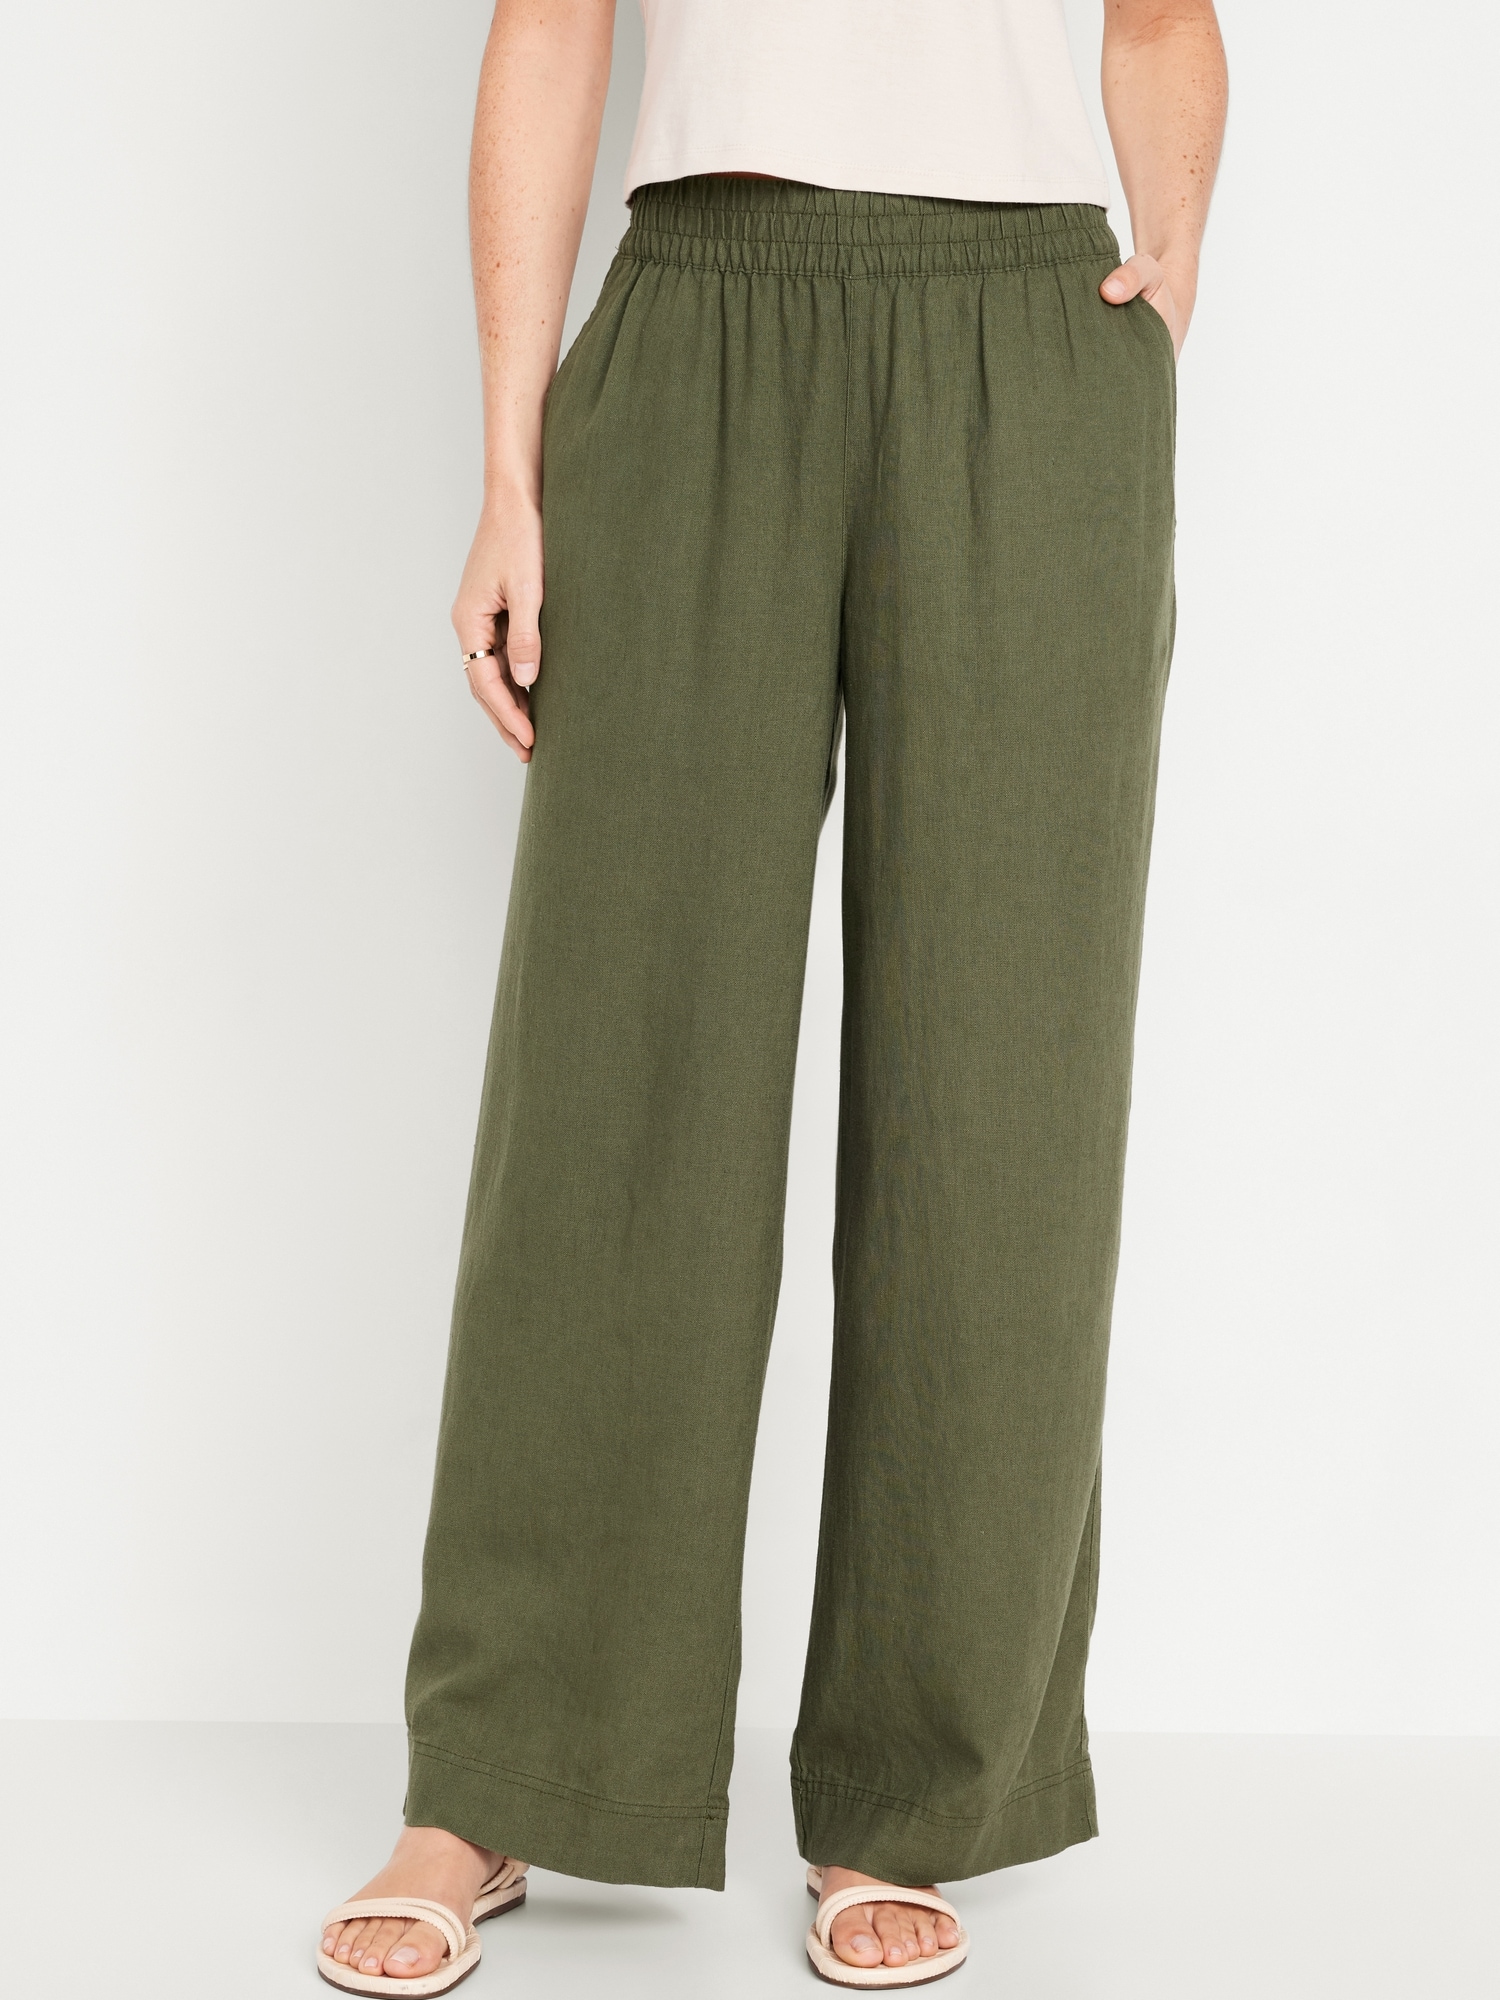 Olive Green Women's Pants for sale in Syracuse, New York